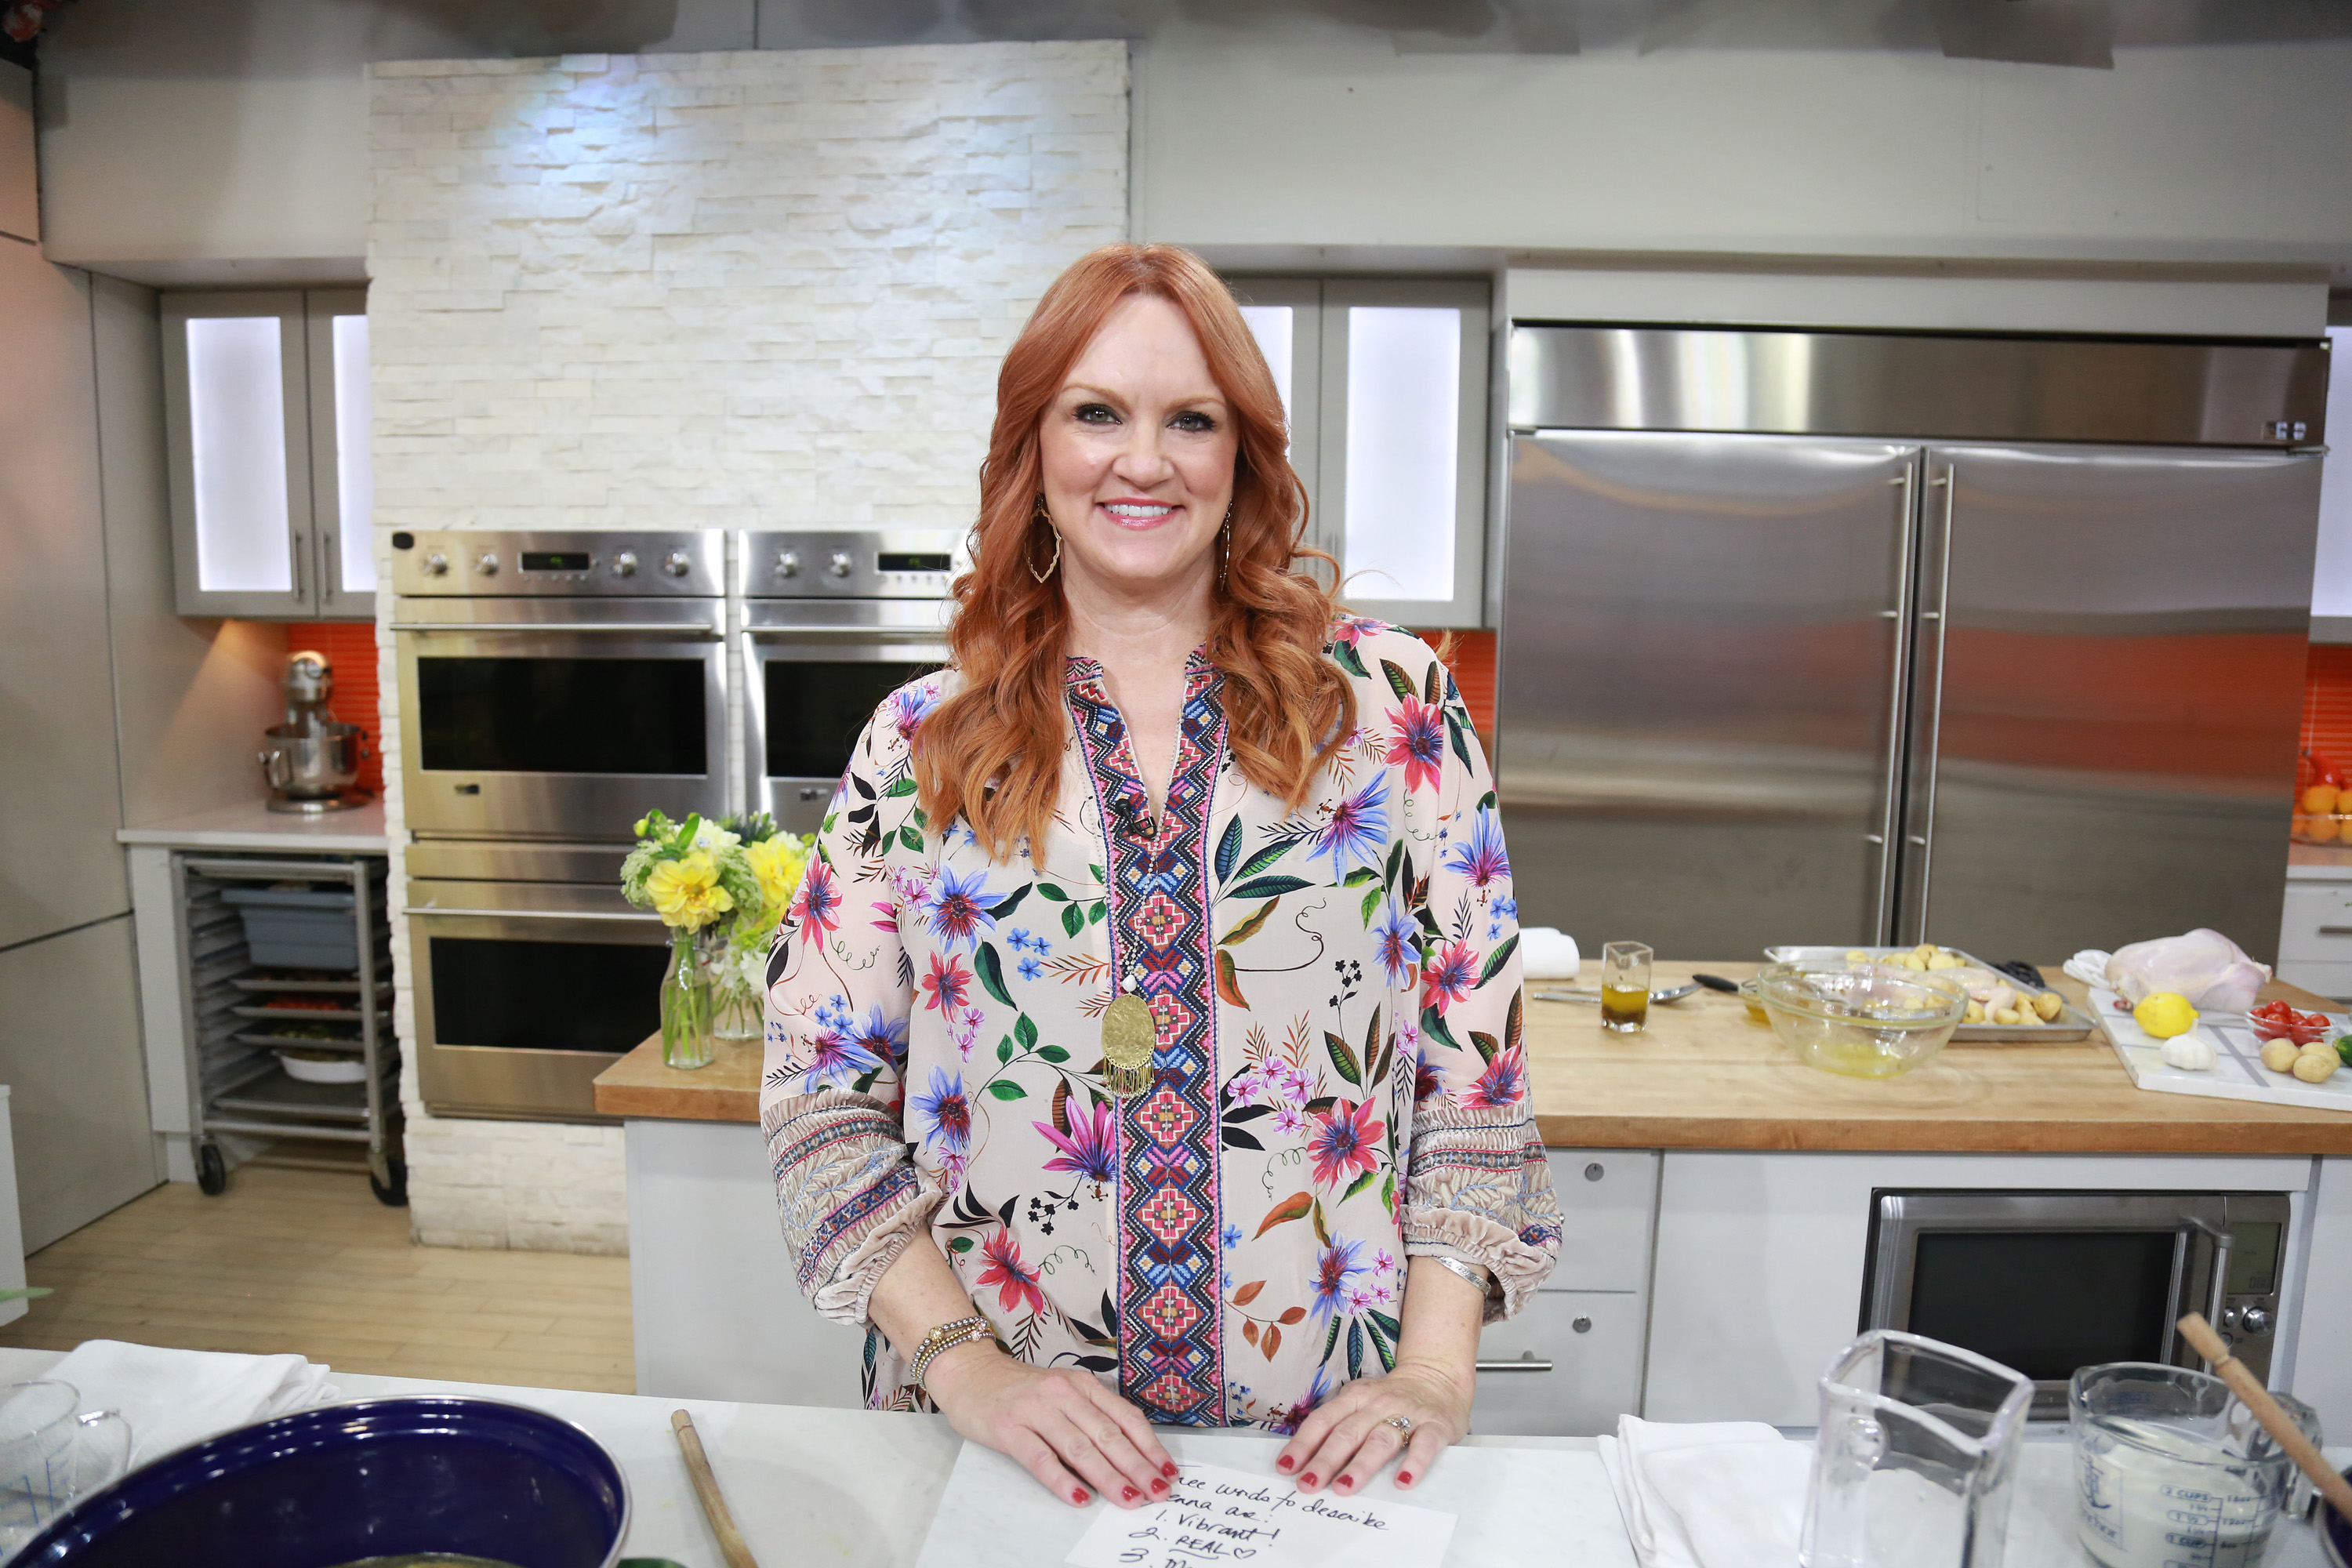 Ree Drummond stands in the Today show kitchen.